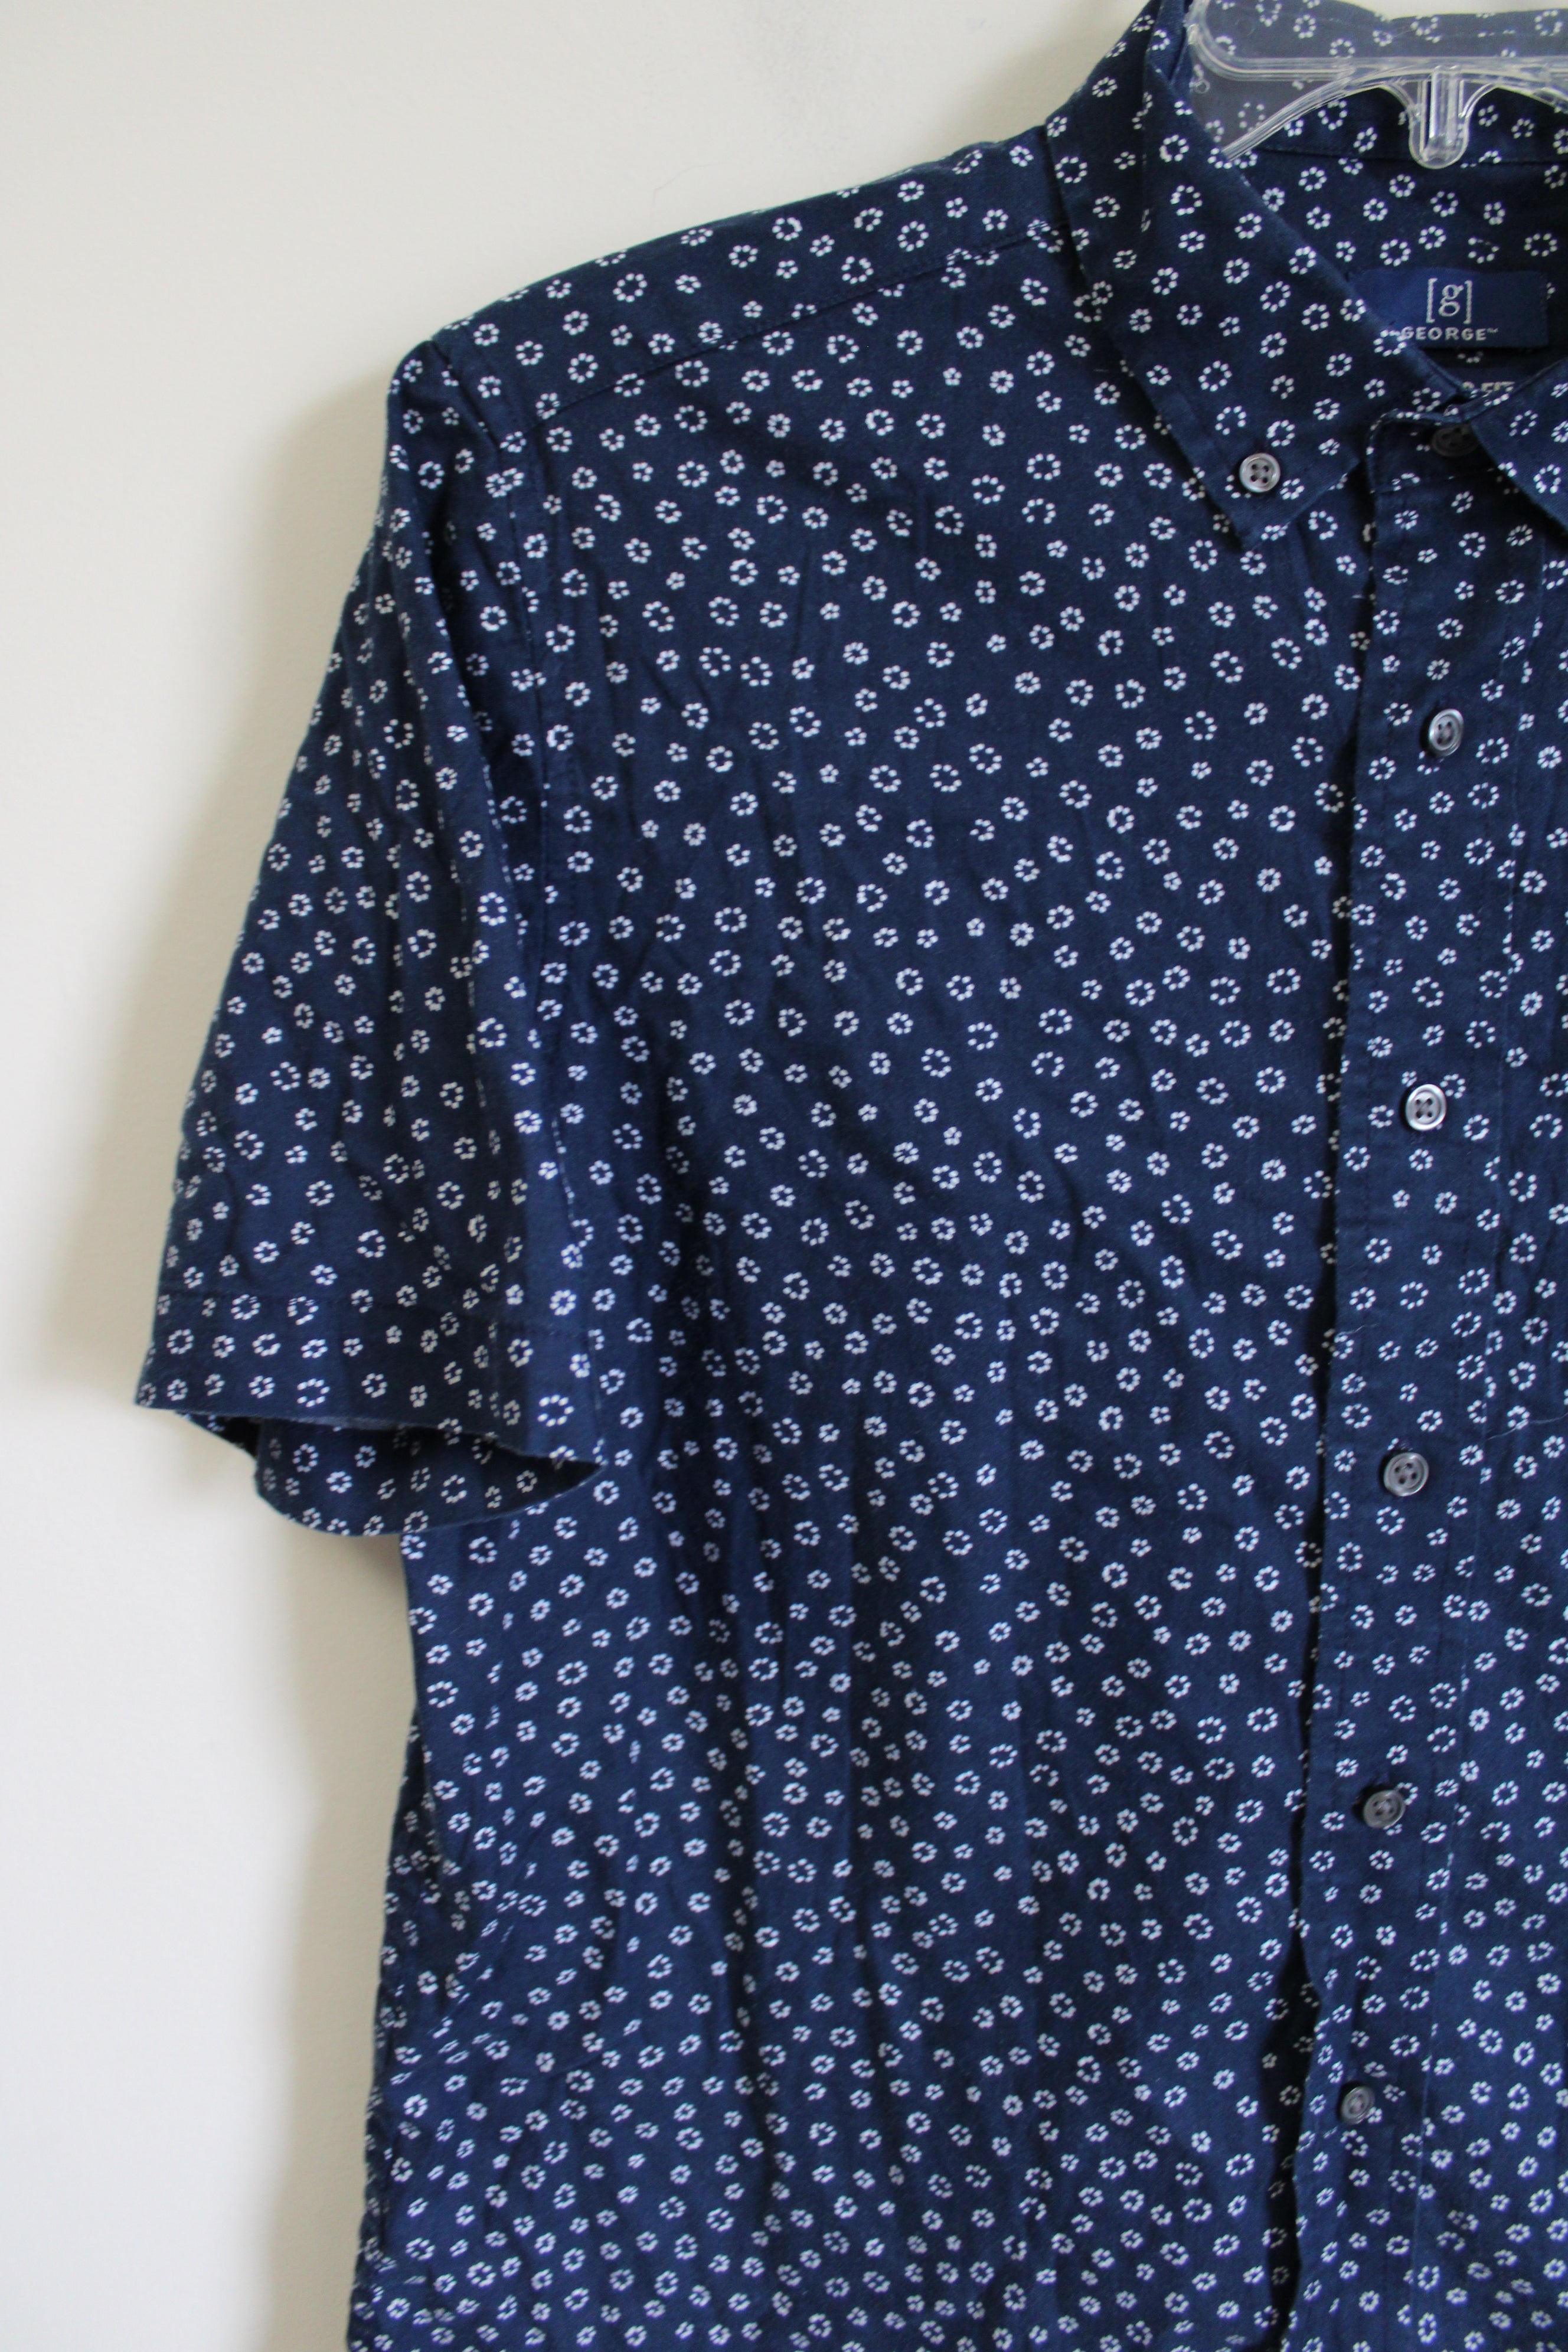 George Classic Fit Navy Blue Patterned Button Down Shirt | M